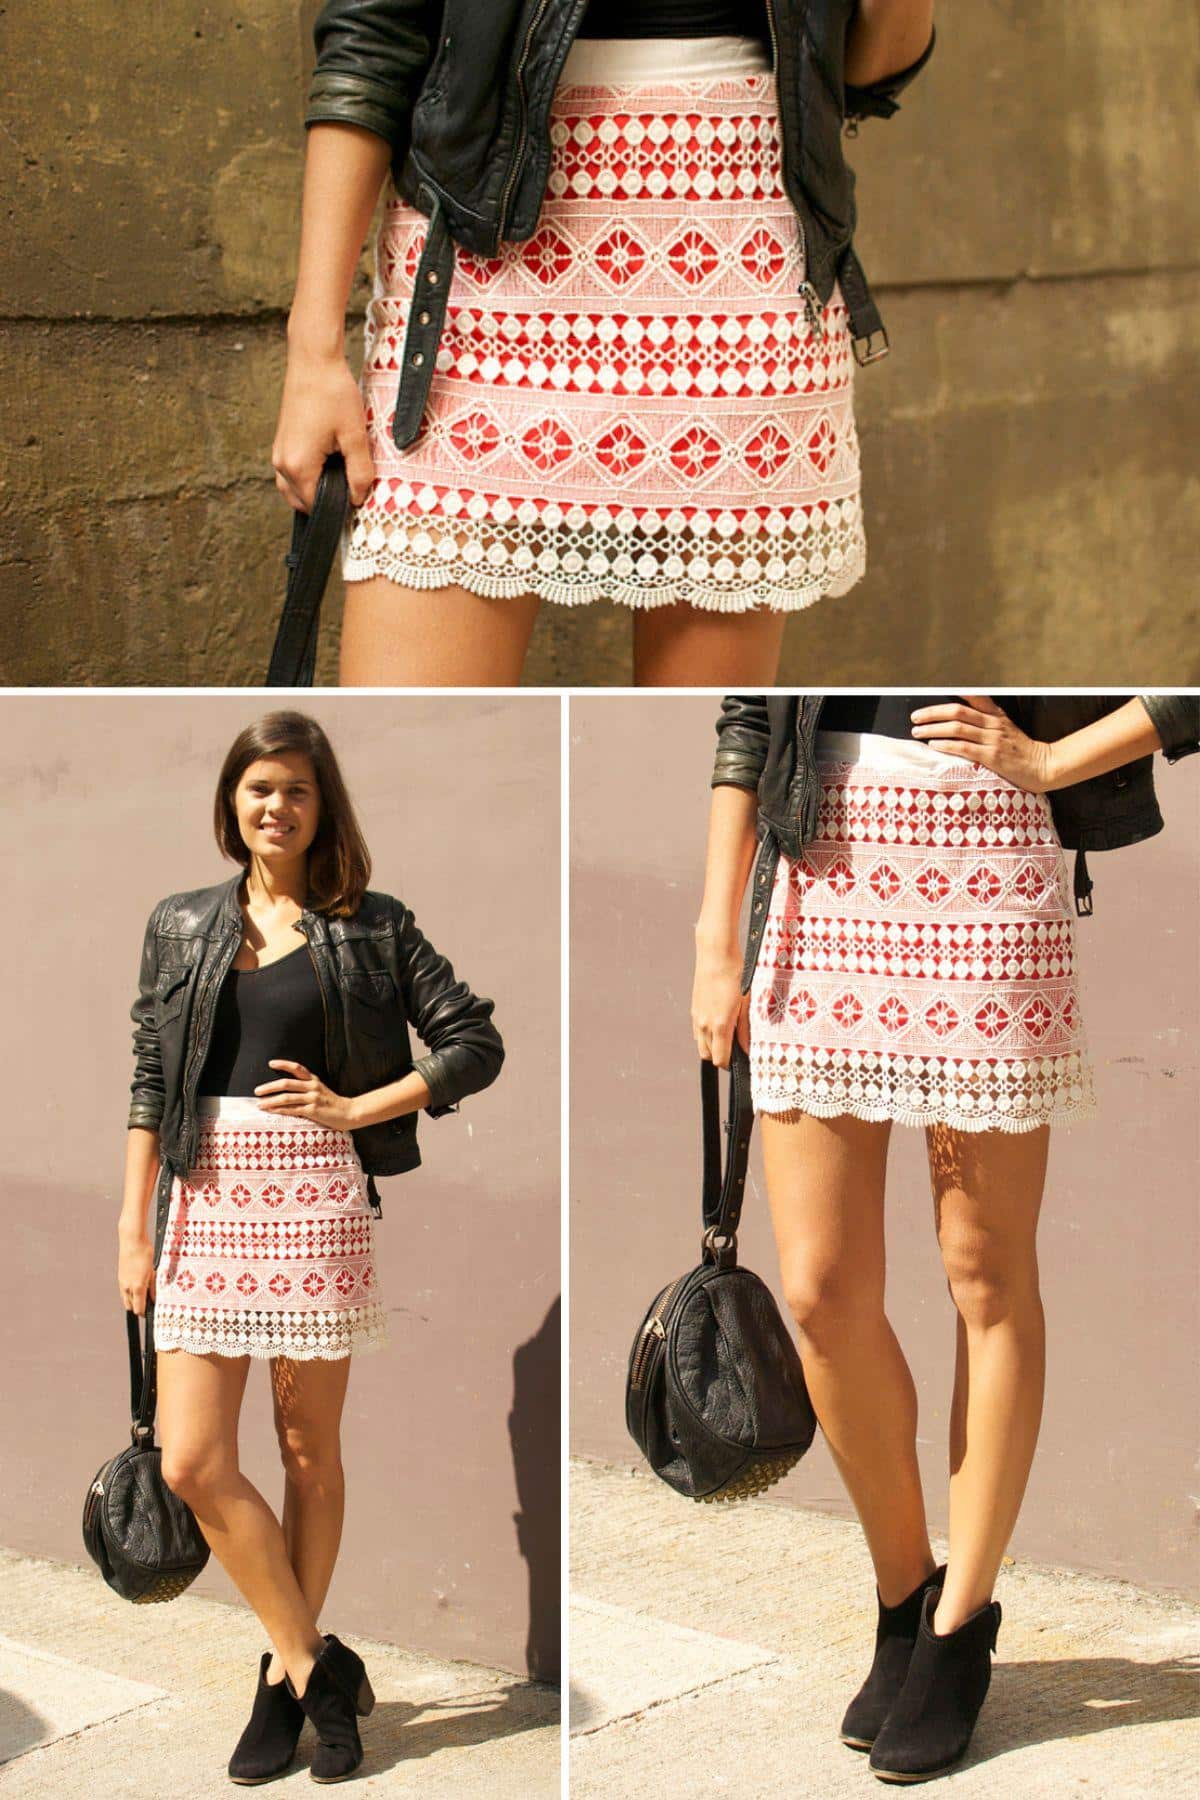 DIY Brightly Lined Lace Mini Skirt collage.